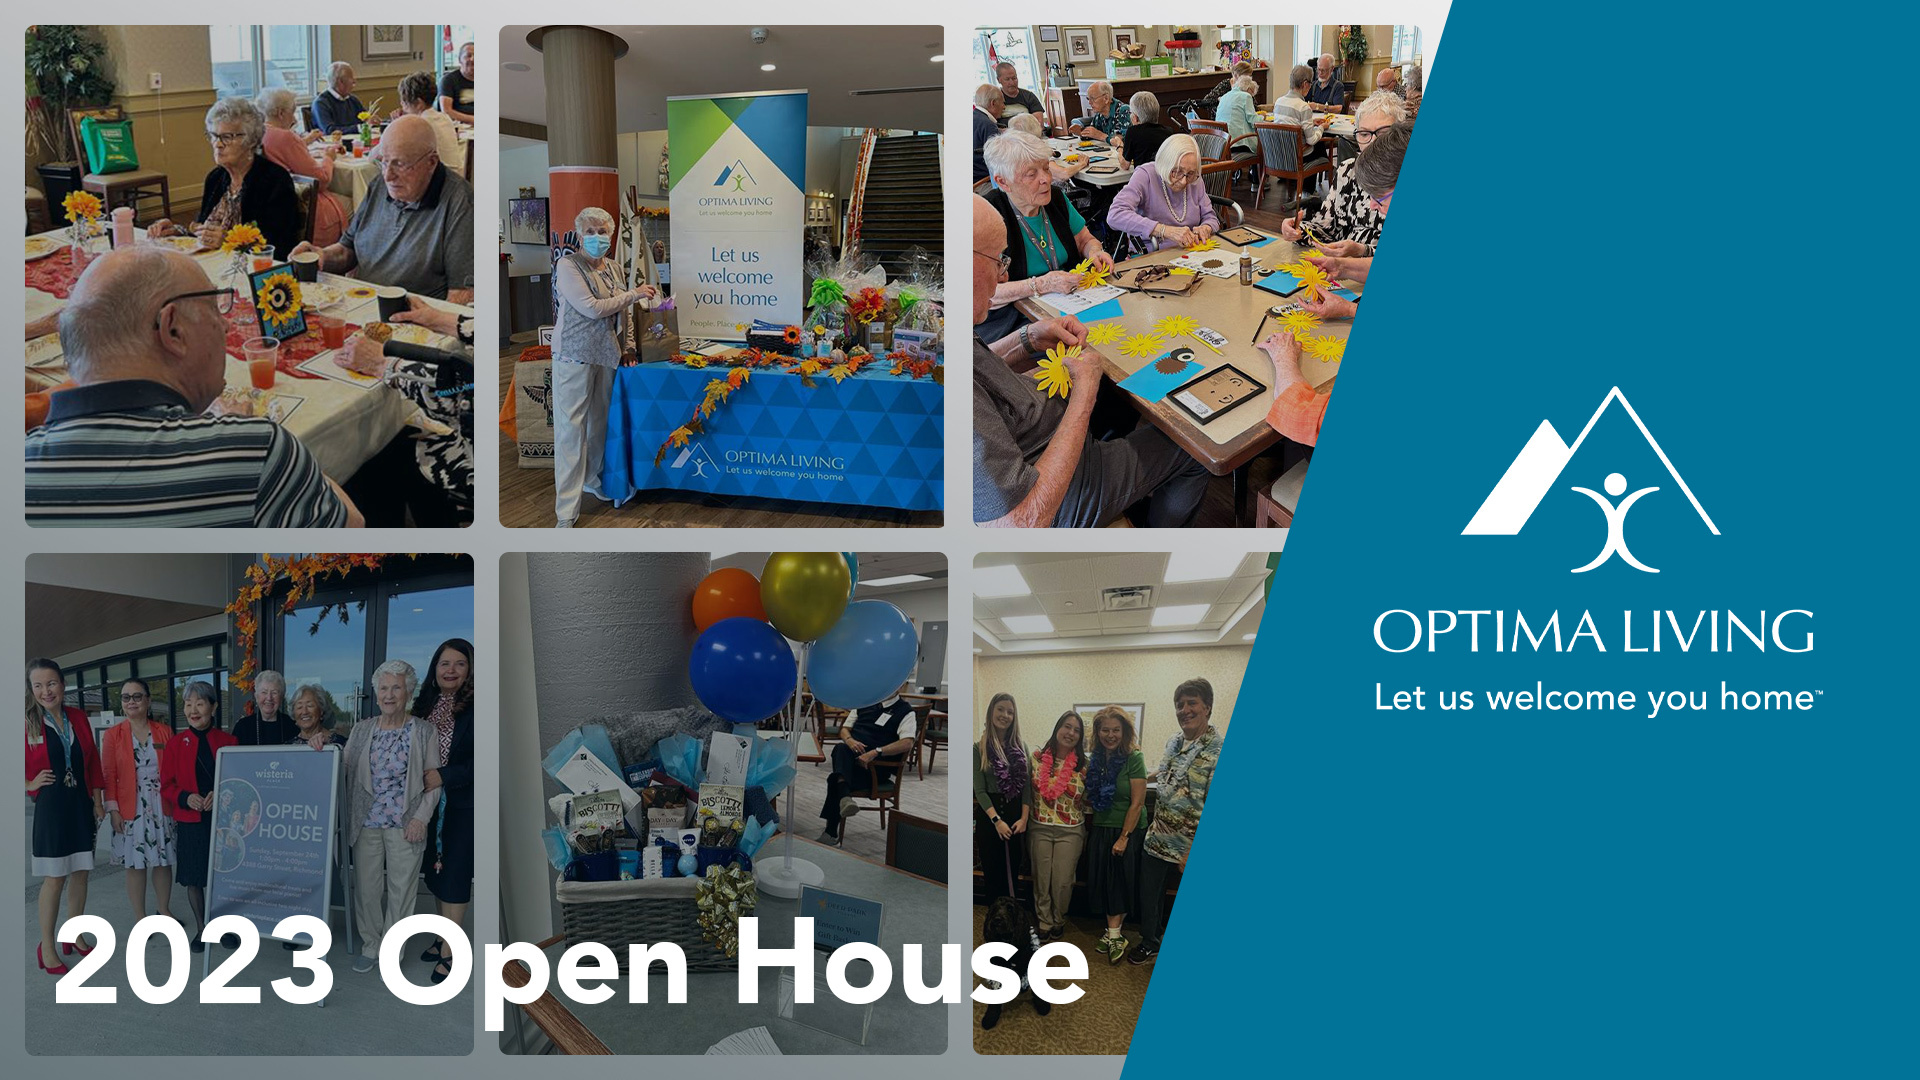 Multiple images featuring the various open houses